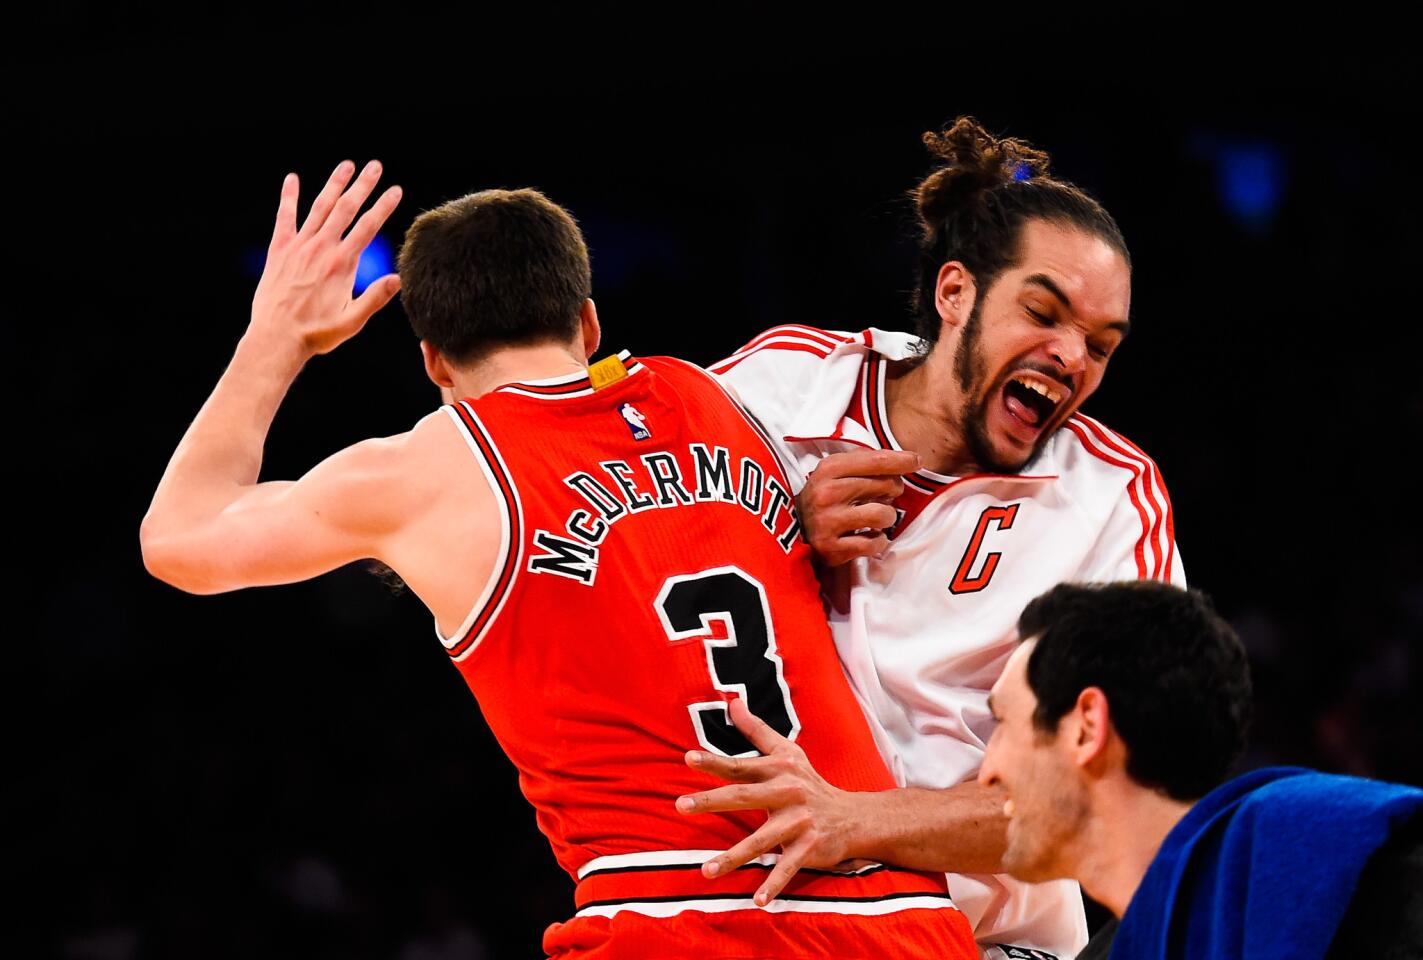 Joakim Noah celebrates with Doug McDermott after a play in the fourth quarter.